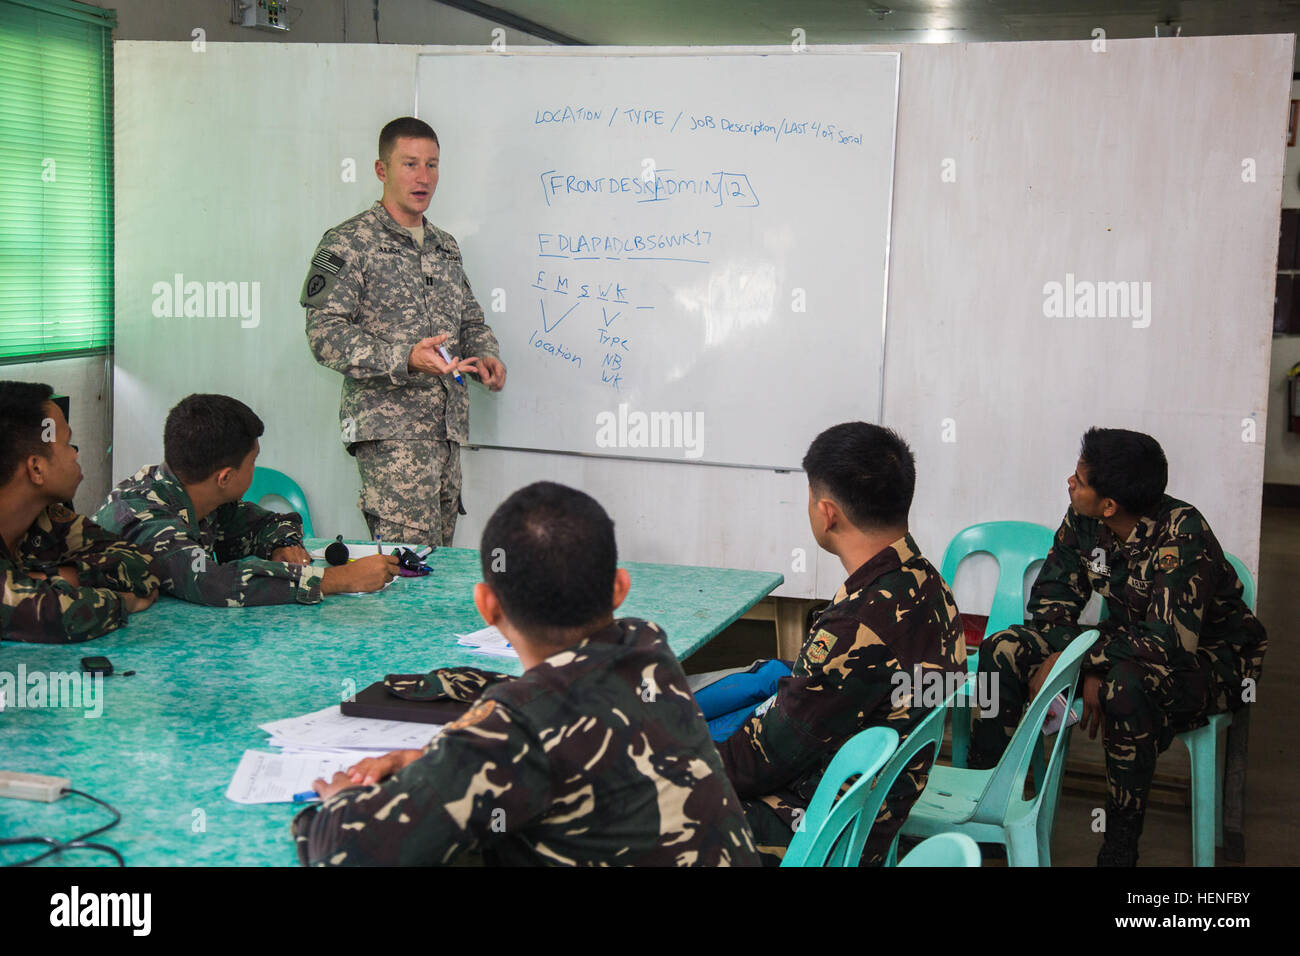 U.S. Army Capt. Scott Julich, Headquarters and Headquarters Troop, 3rd Squadron, 4th Cavalry Regiment, talks with soldiers from the Philippine army's 7th Signal Battalion about cyber awareness during exercise Balikatan 2014 on Fort Magsaysay, Philippines, April 30, 2014. Scott displays how service members can better protect themselves from hackers by choosing appropriate usernames. This year marks the 30th iteration of the exercise, which is an annual Republic of the Philippines-U.S. military bilateral training exercise and humanitarian civic assistance engagement. (U.S. Army Photo by Spc. Mic Stock Photo